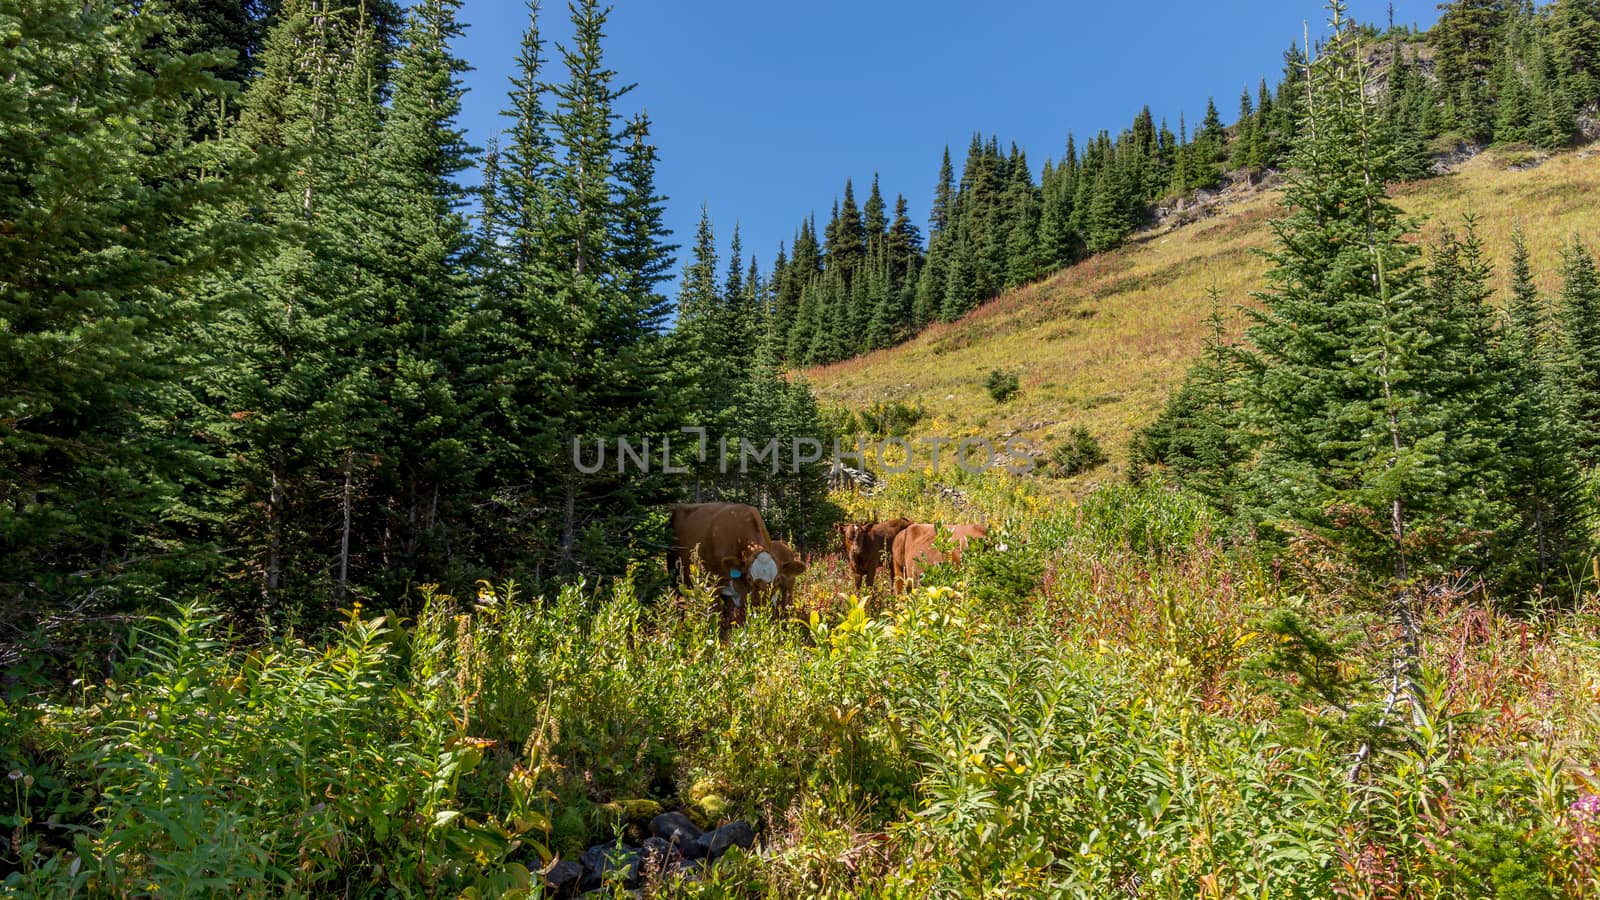 Meeting a herd of cows grazing in the high alpine meadows of Tod Mountain in the Sushwap Highlands in central British Columbia